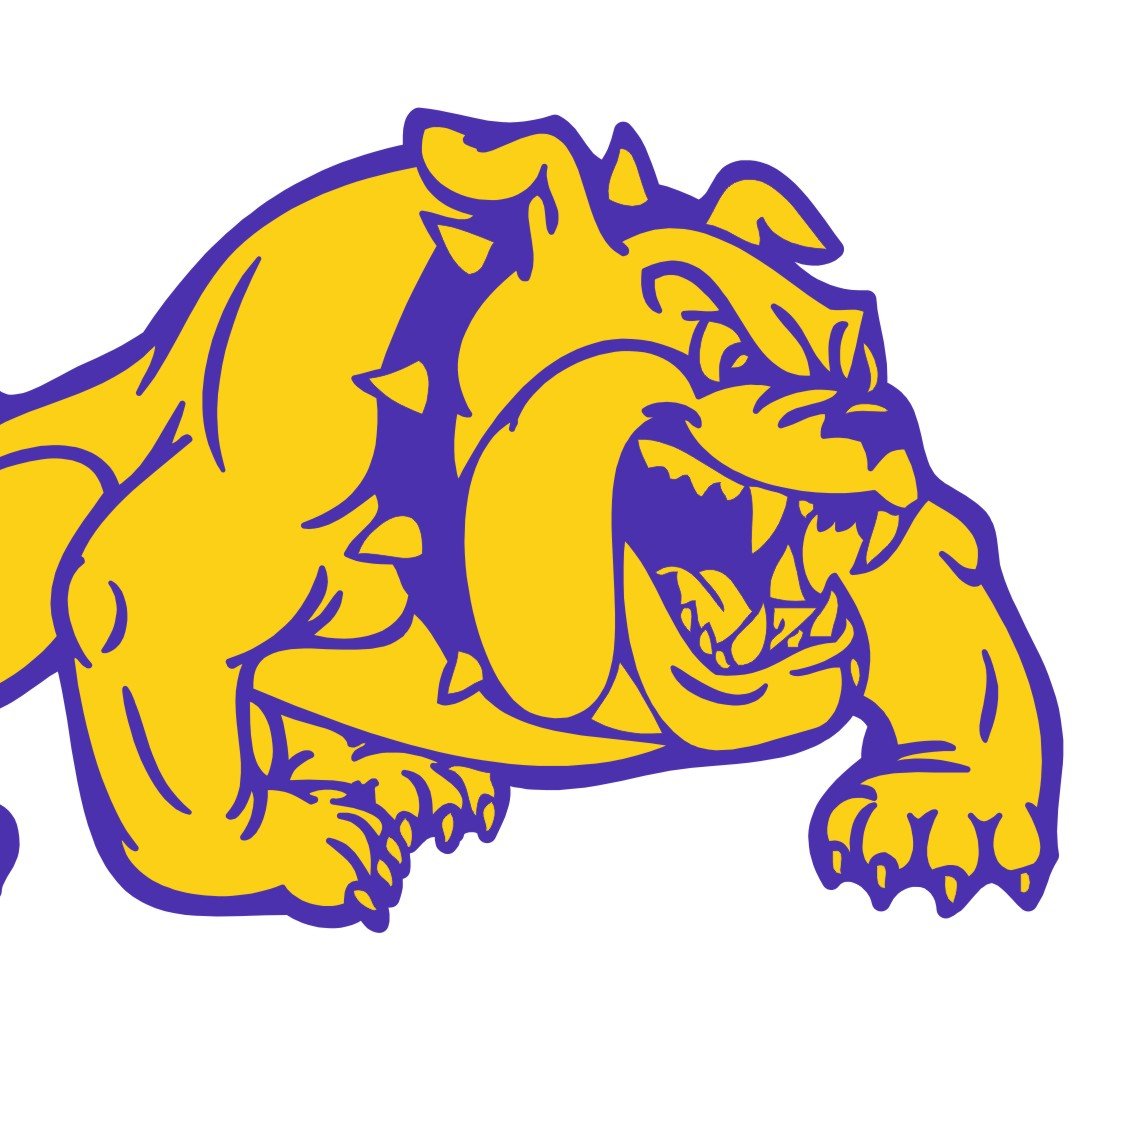 The Official Twitter Page of the McHi Bulldogs Boys Basketball Team.